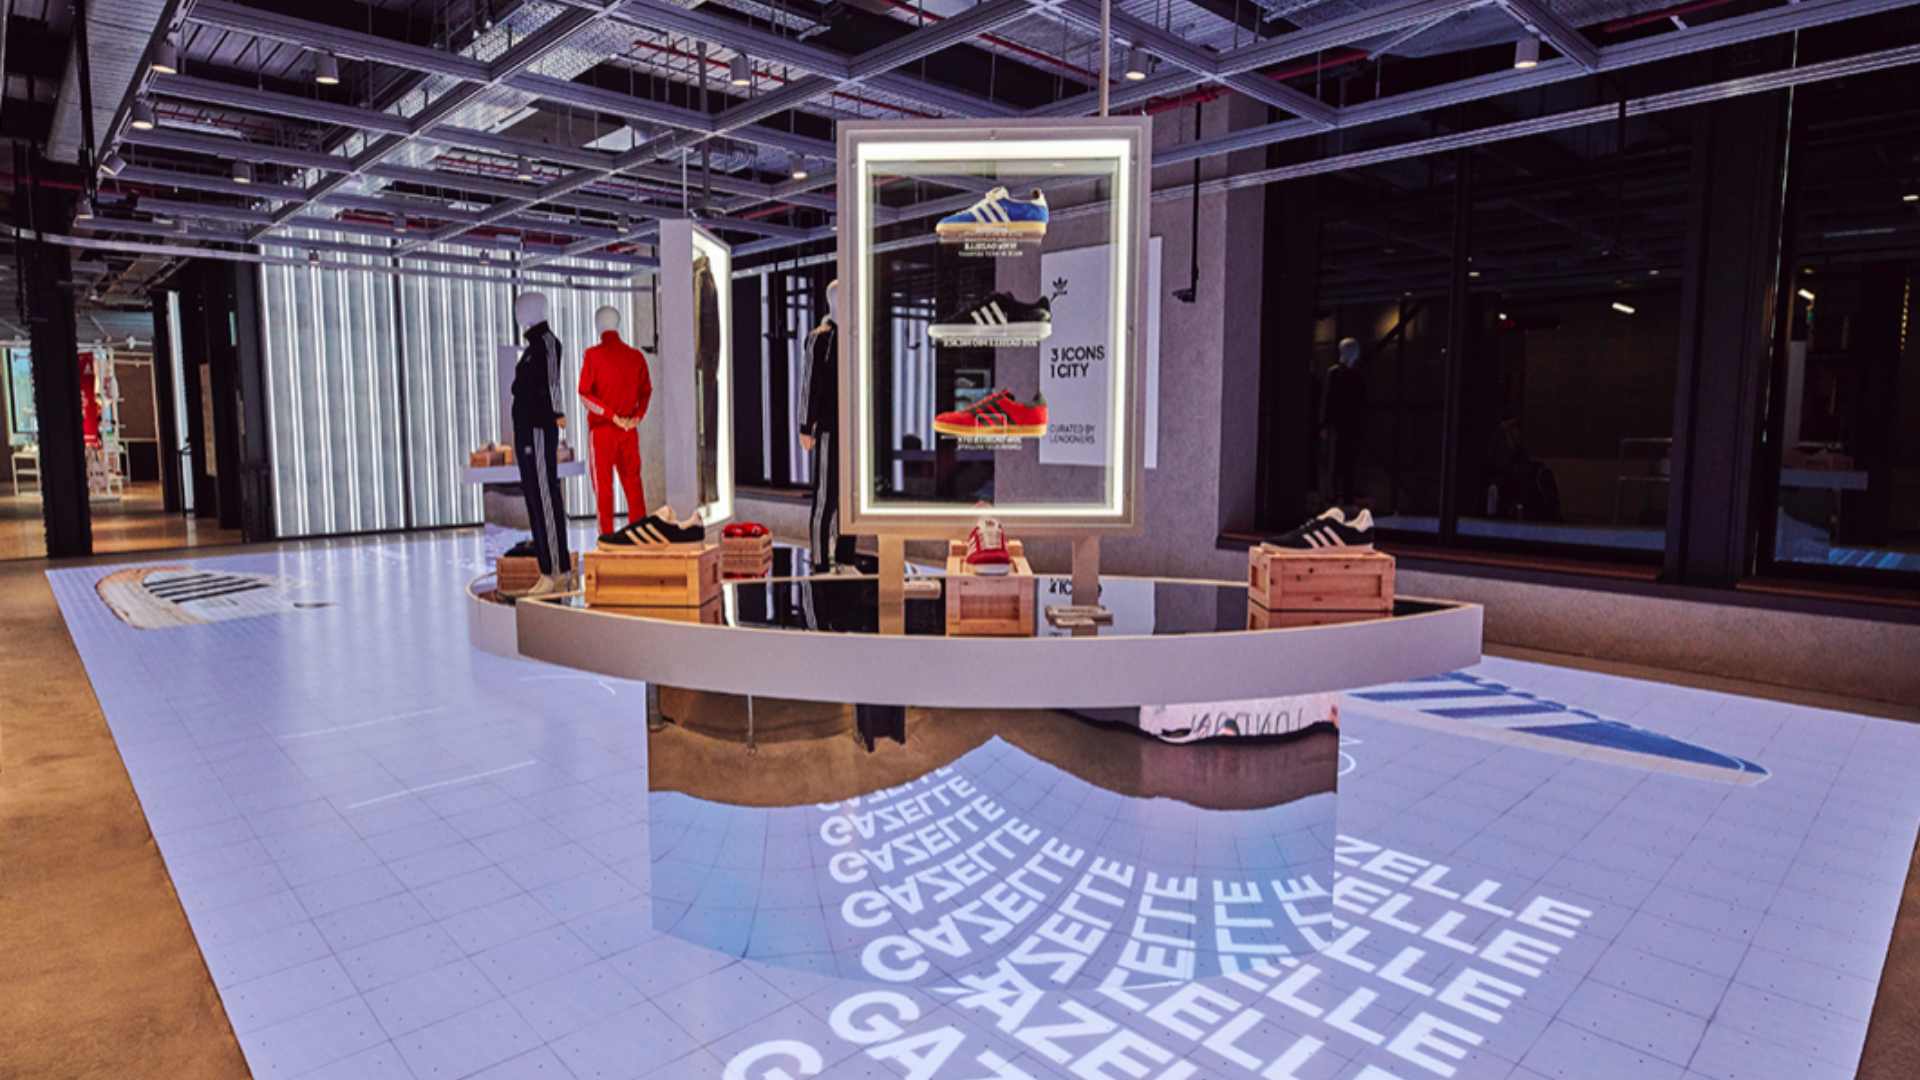 The Adidas LDN Flagship unveiled in October 2019 presents a whole new vision of store design: sustainable, digital, creative, community minded & with local flavour.